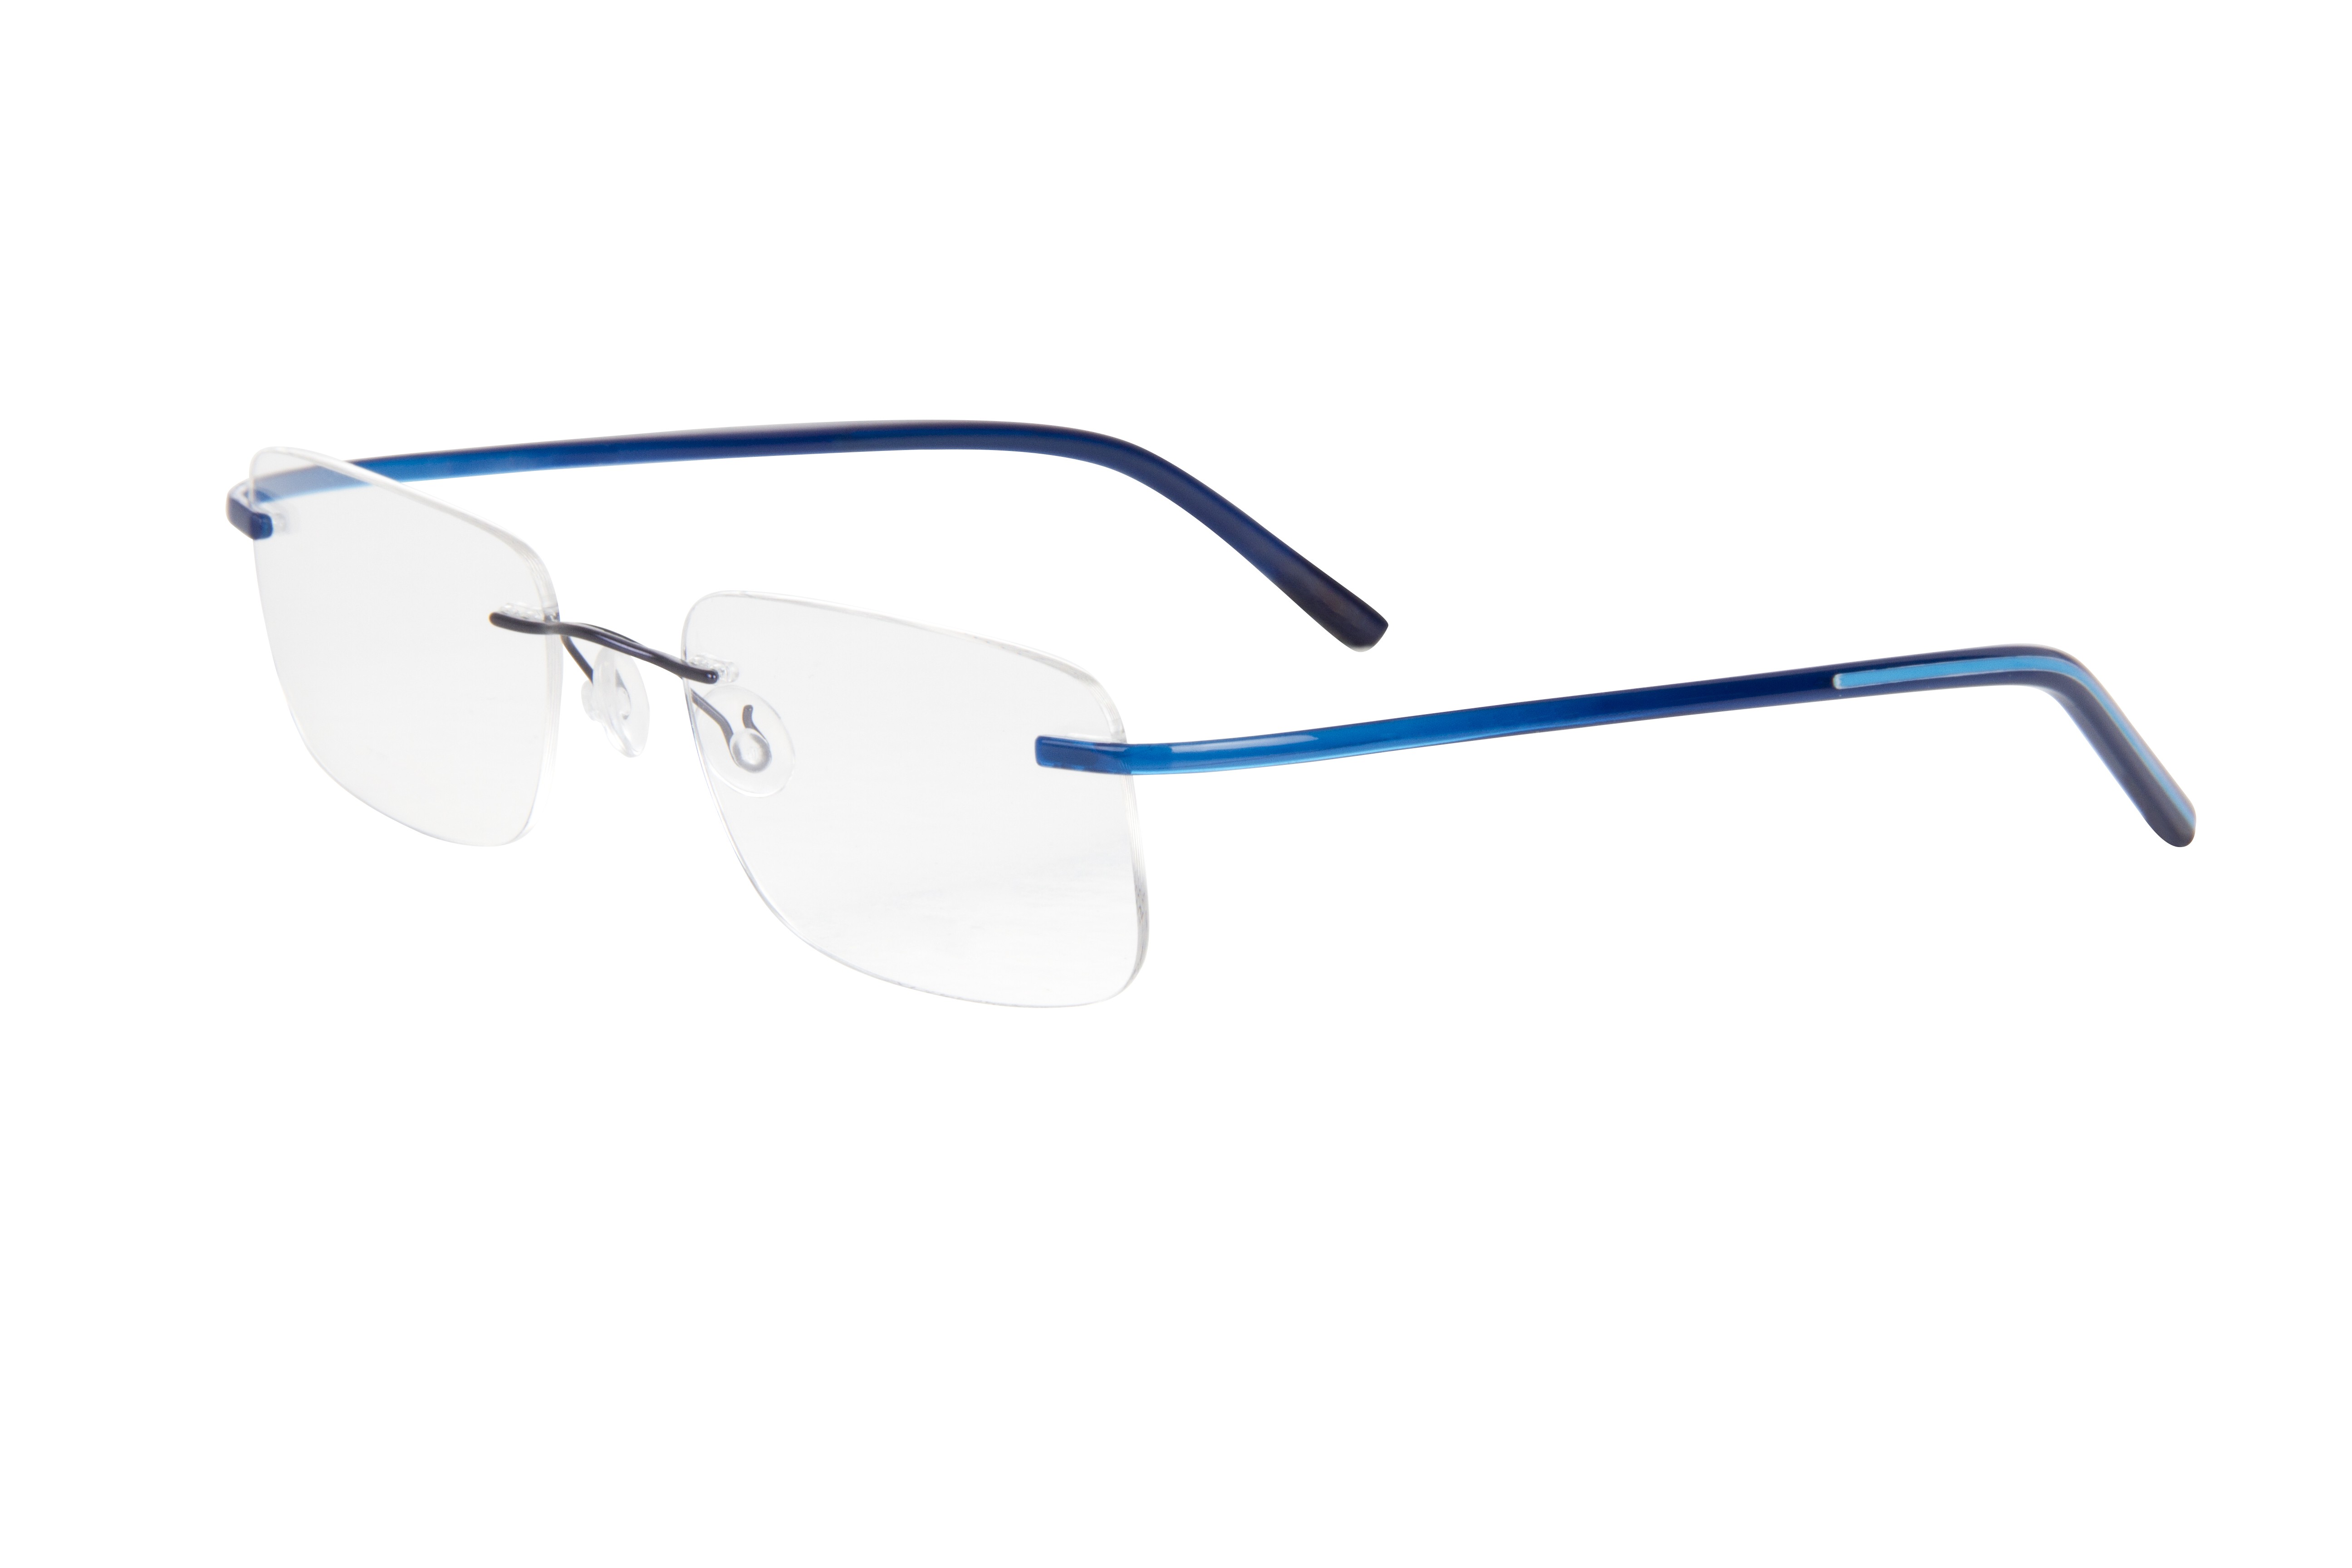 Airlock AIRLOCK ENERGY 203 Eyeglasses - Airlock by Marchon Authorized ...